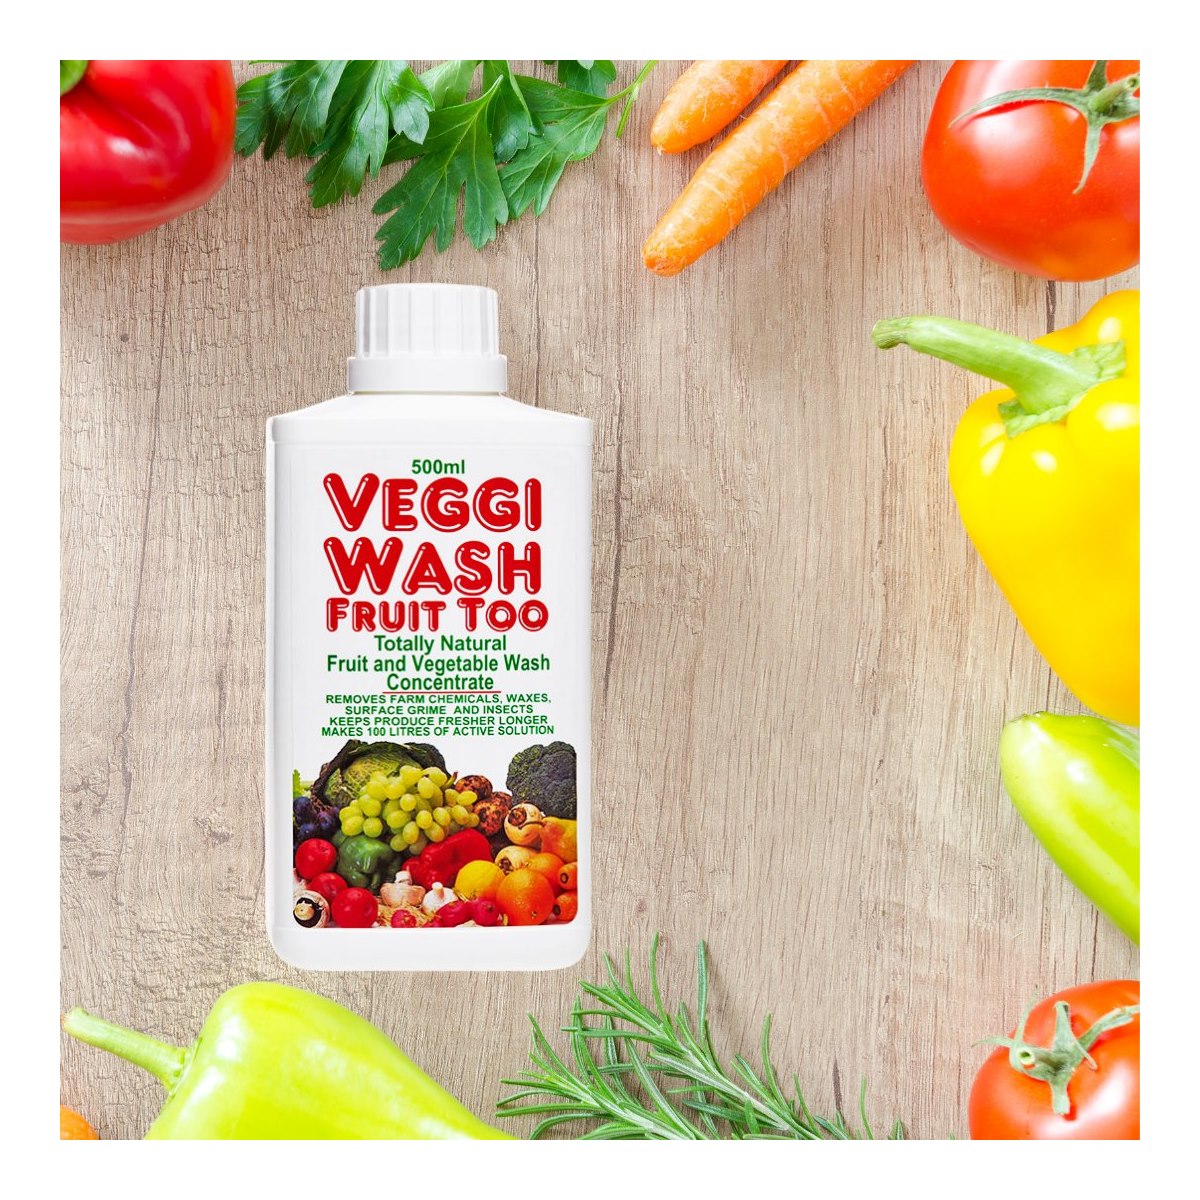 Where to Buy Veggi Wash Concentrate